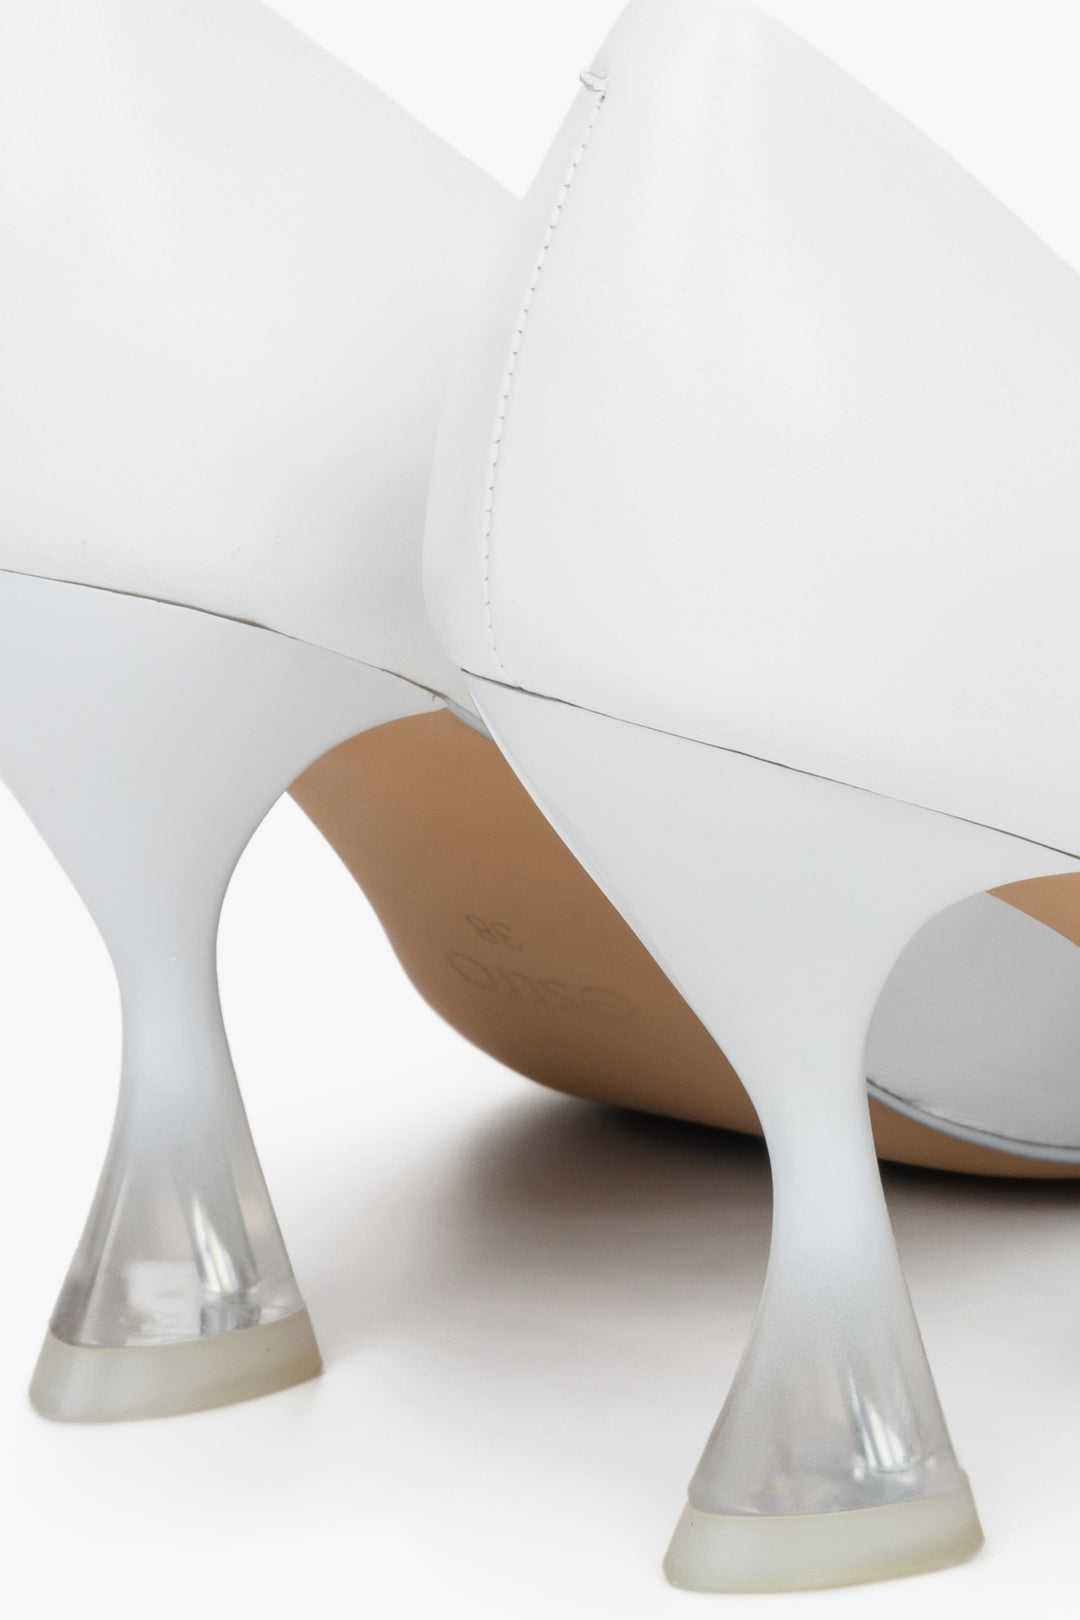 Women's white leather high-heeled pumps by Estro - close-up on the heel.